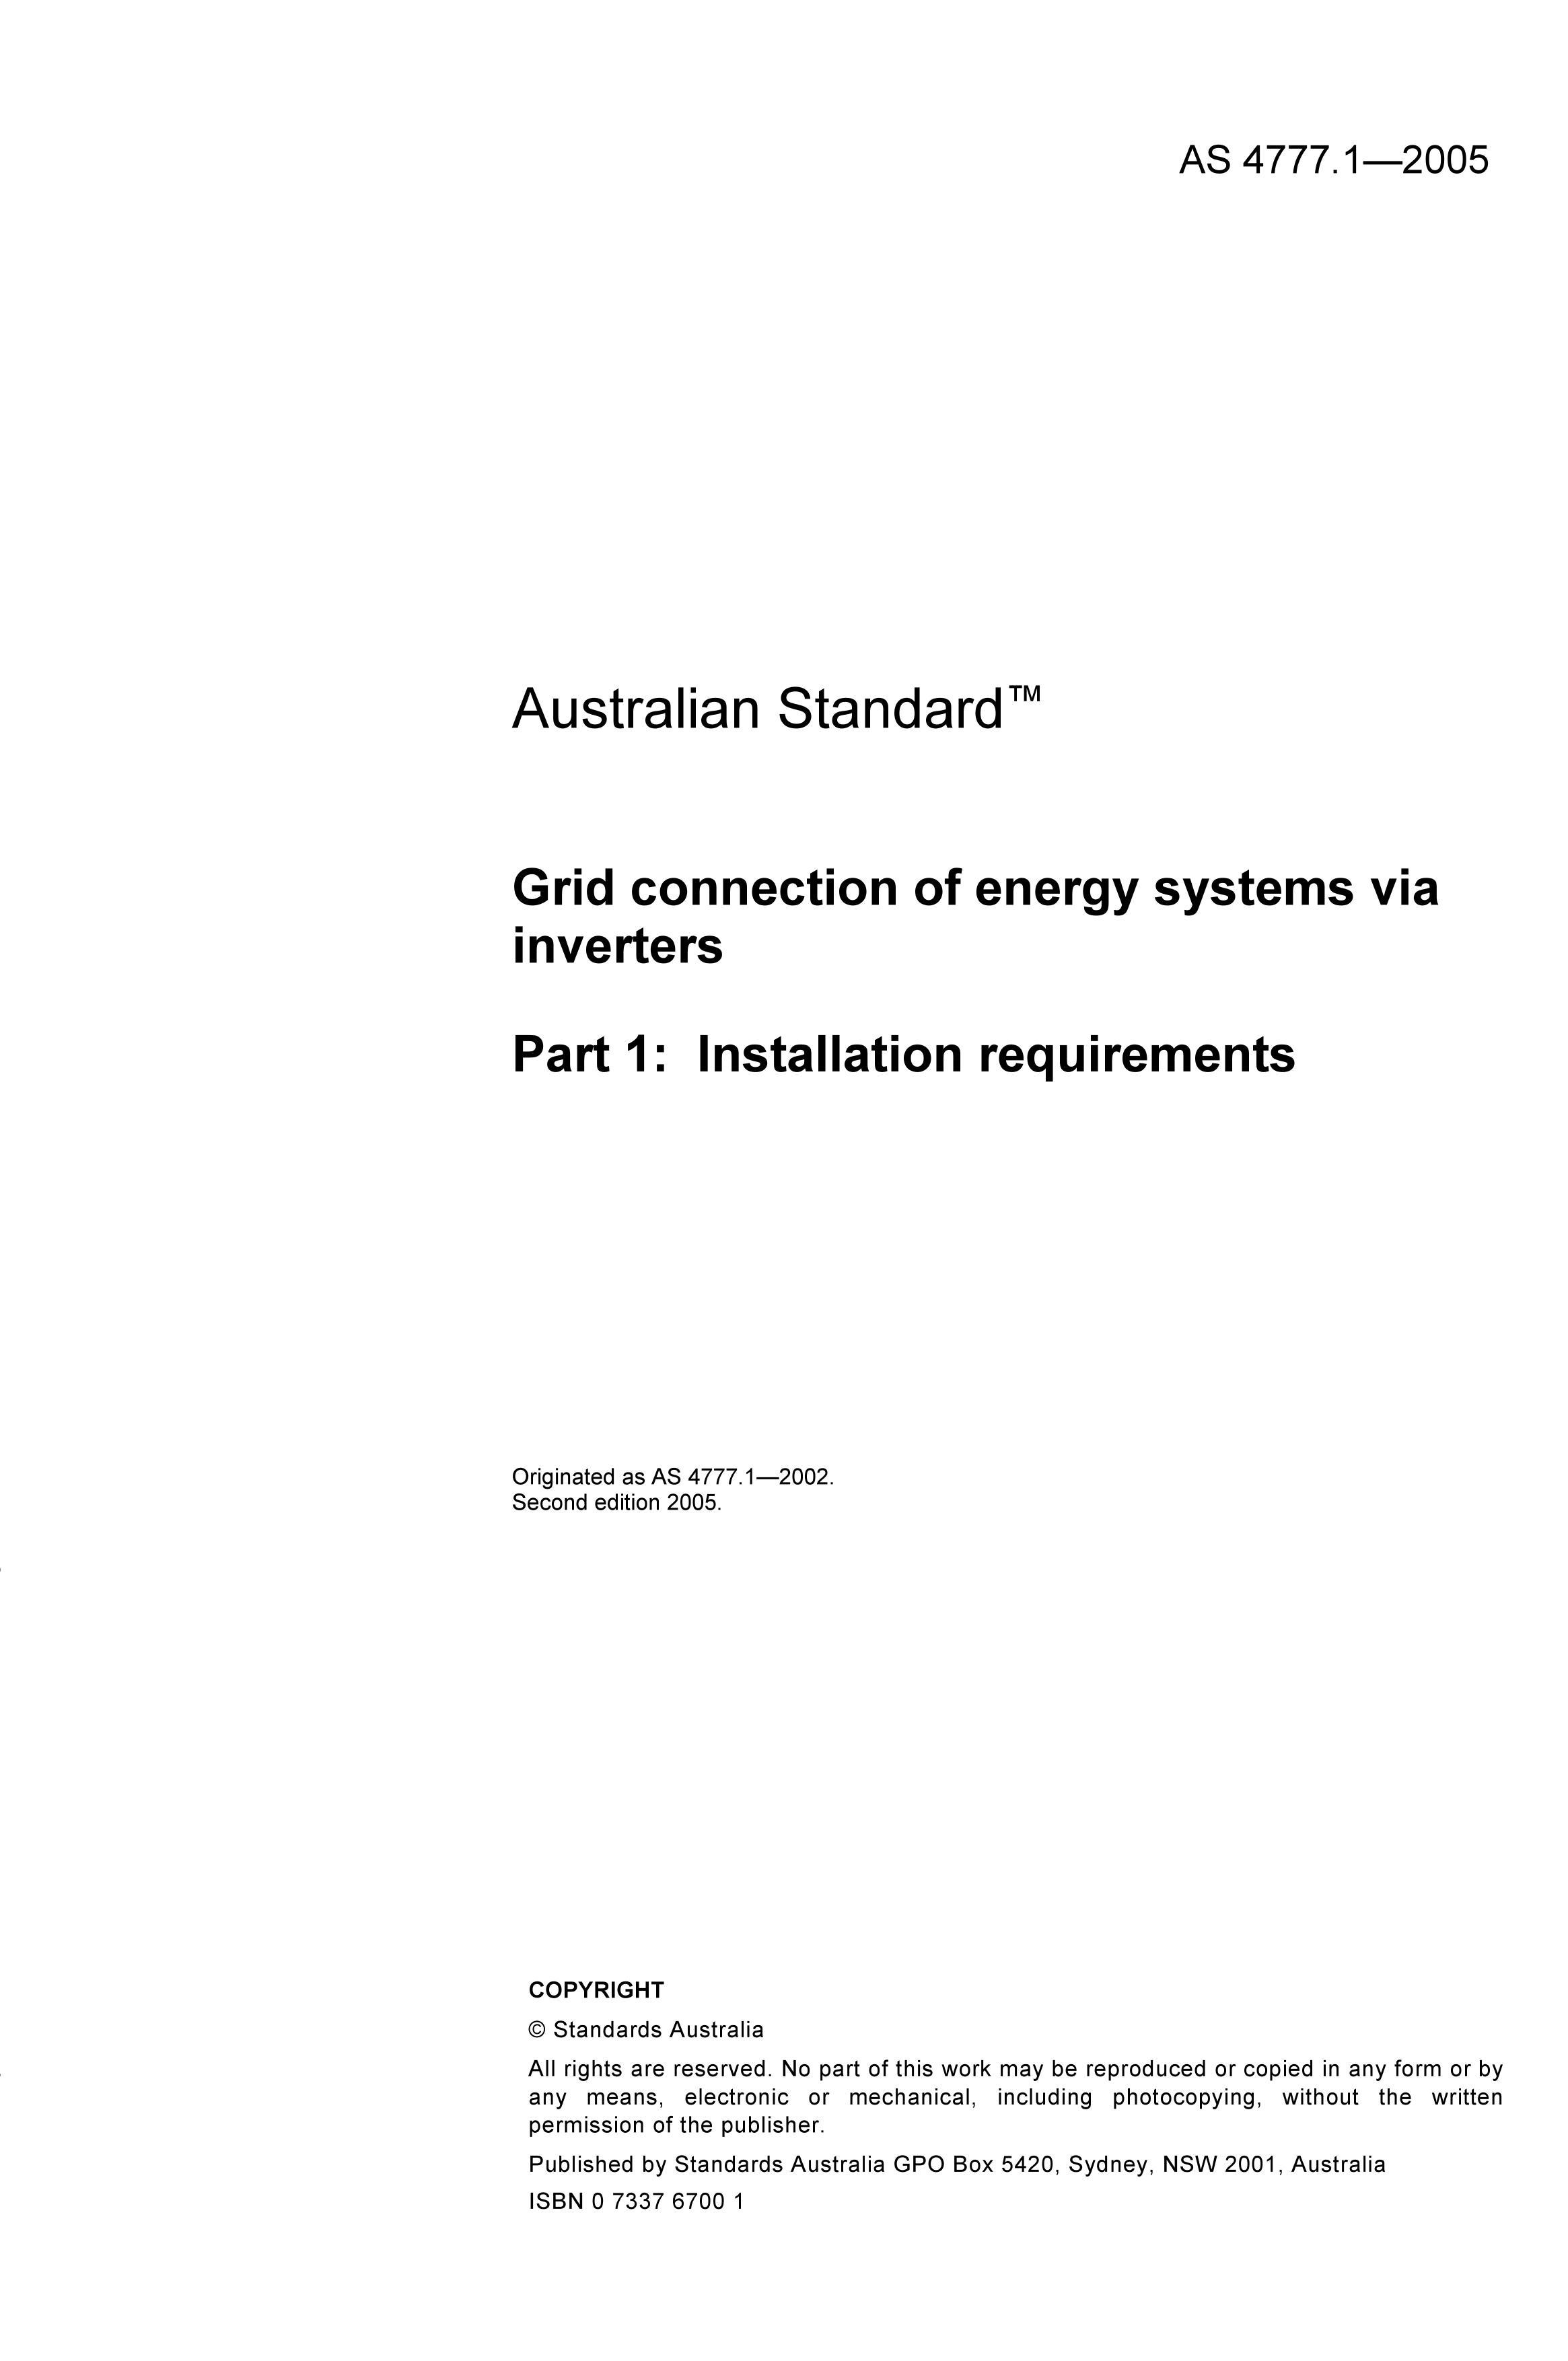 AS 4777.1-2005 Grid connection of energy systems via inverters Part 1 Installation requirements .pdf3ҳ